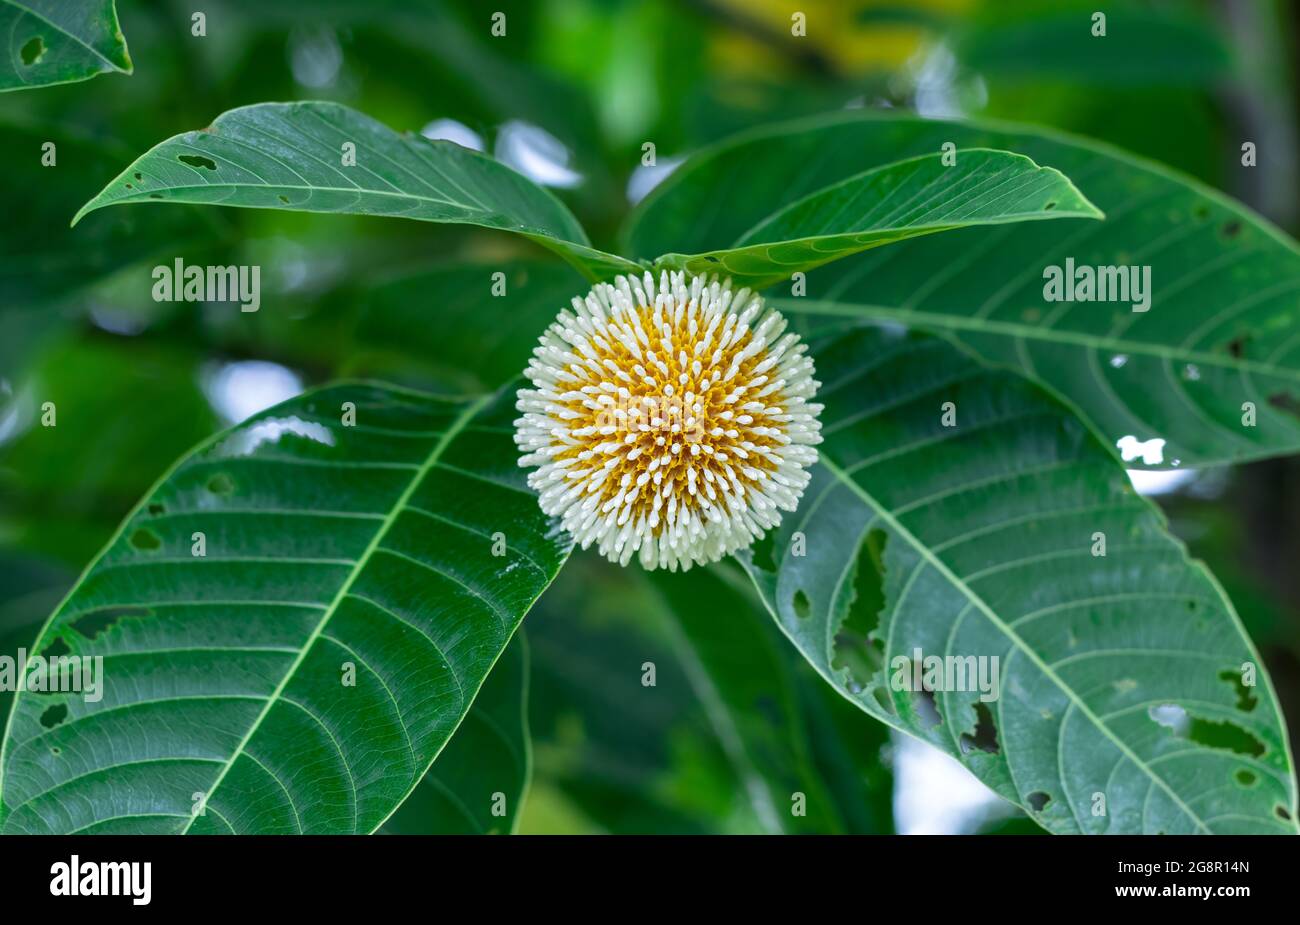 A leichhardt pine or Kadam flower with green leaves close up on the tree Stock Photo